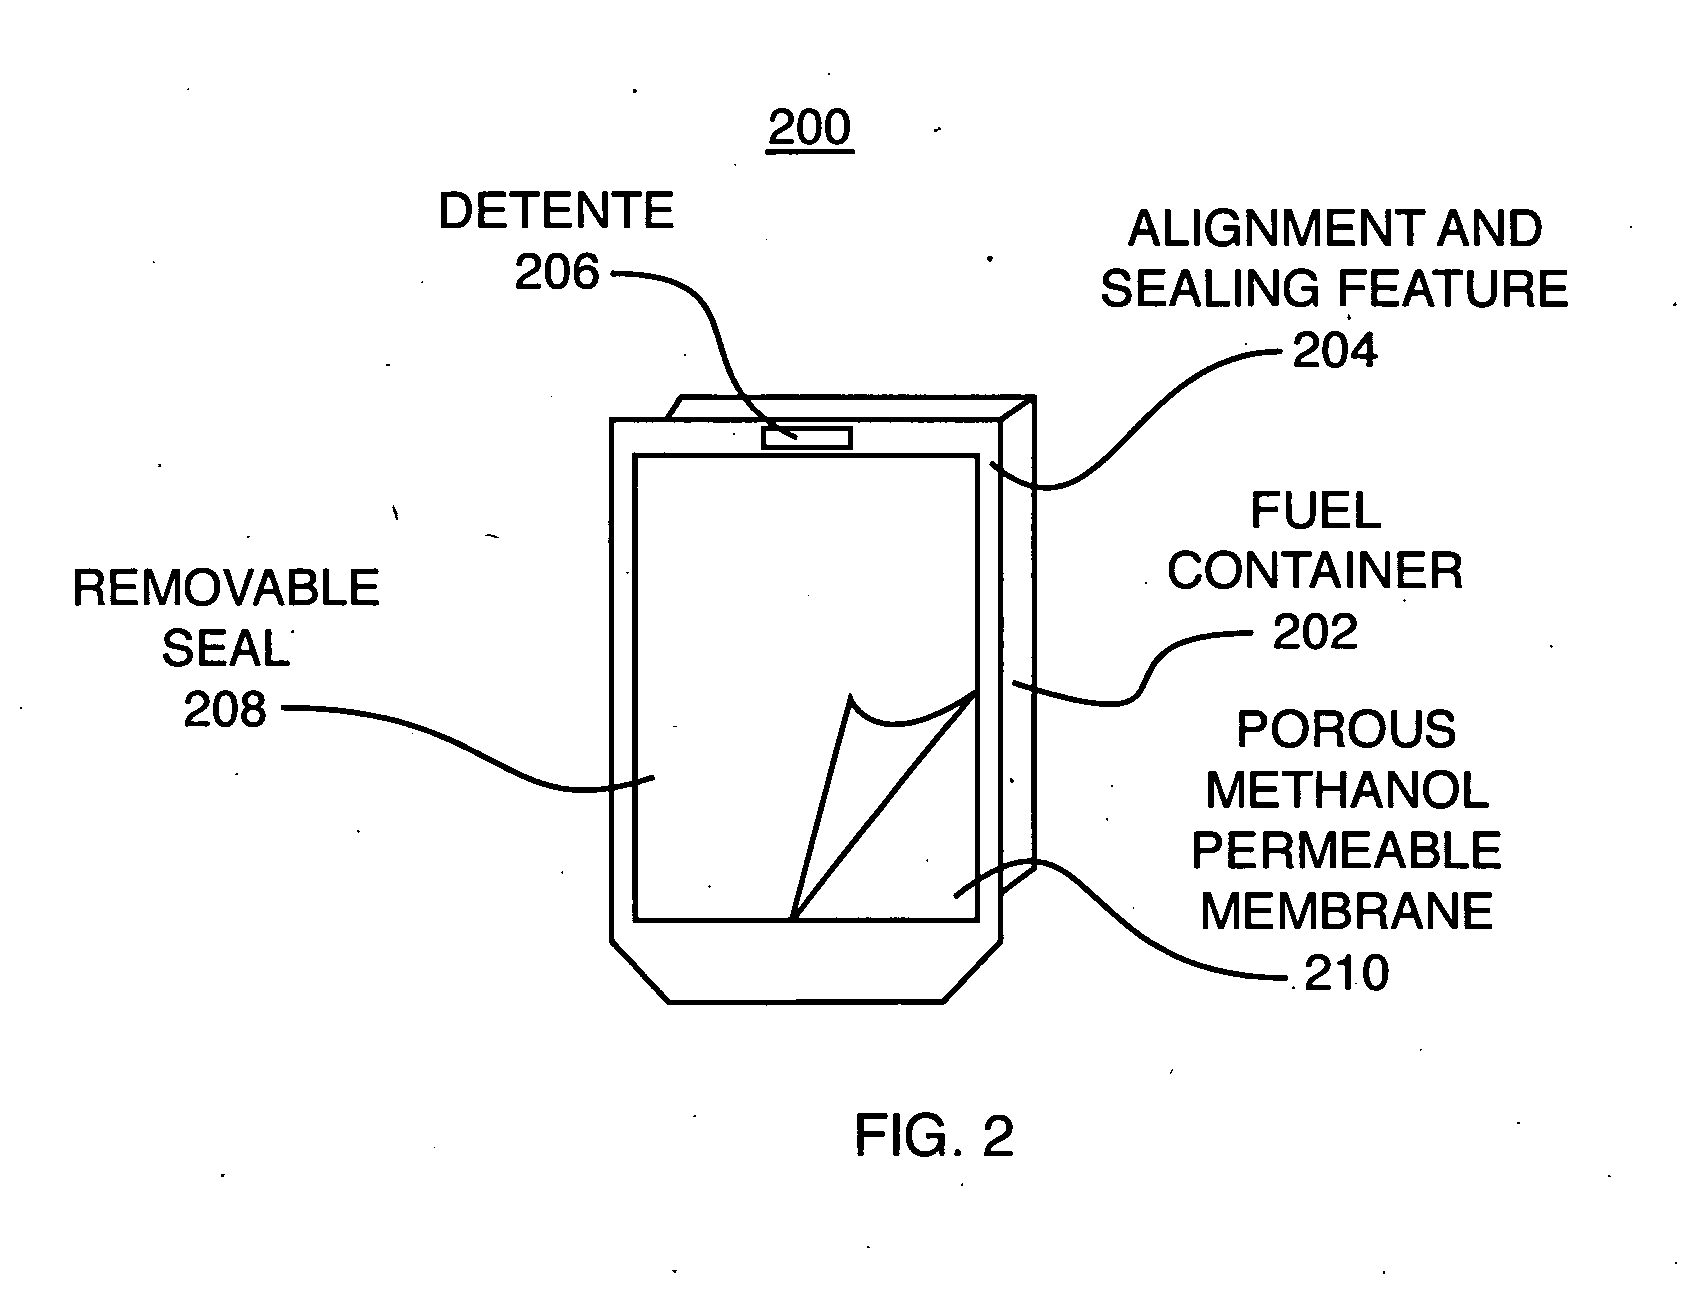 Fuel container with reticulated material